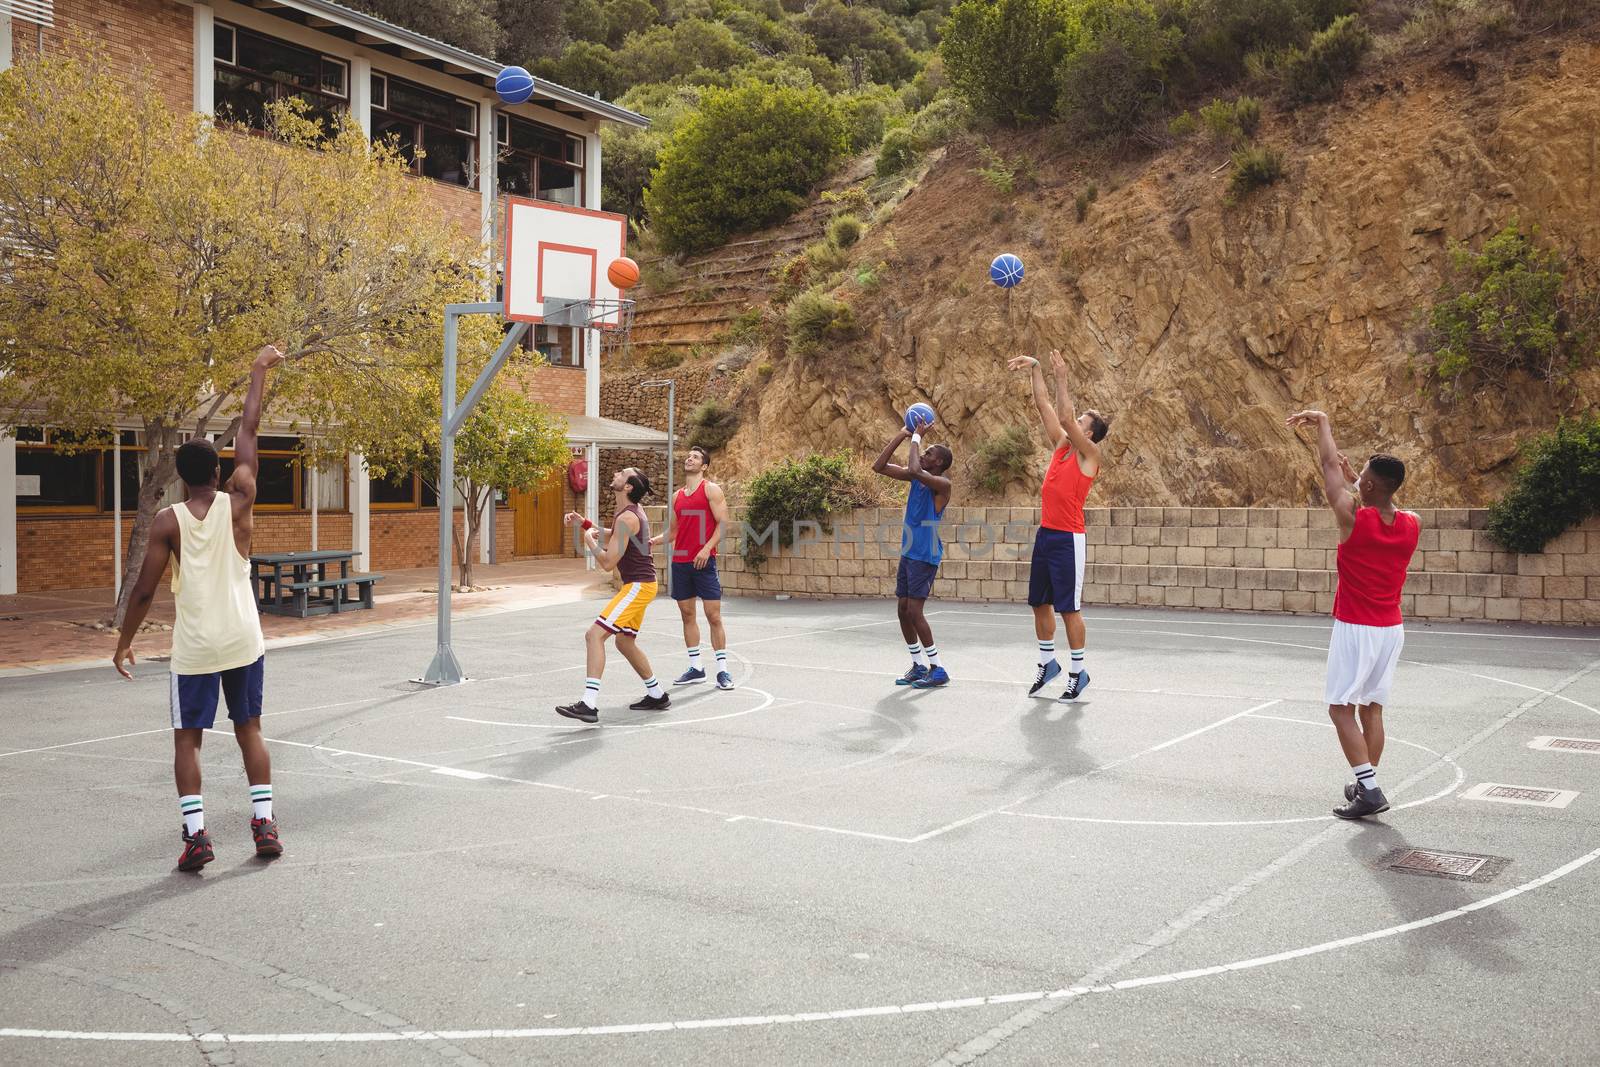 Basketball players practicing in basketball court by Wavebreakmedia